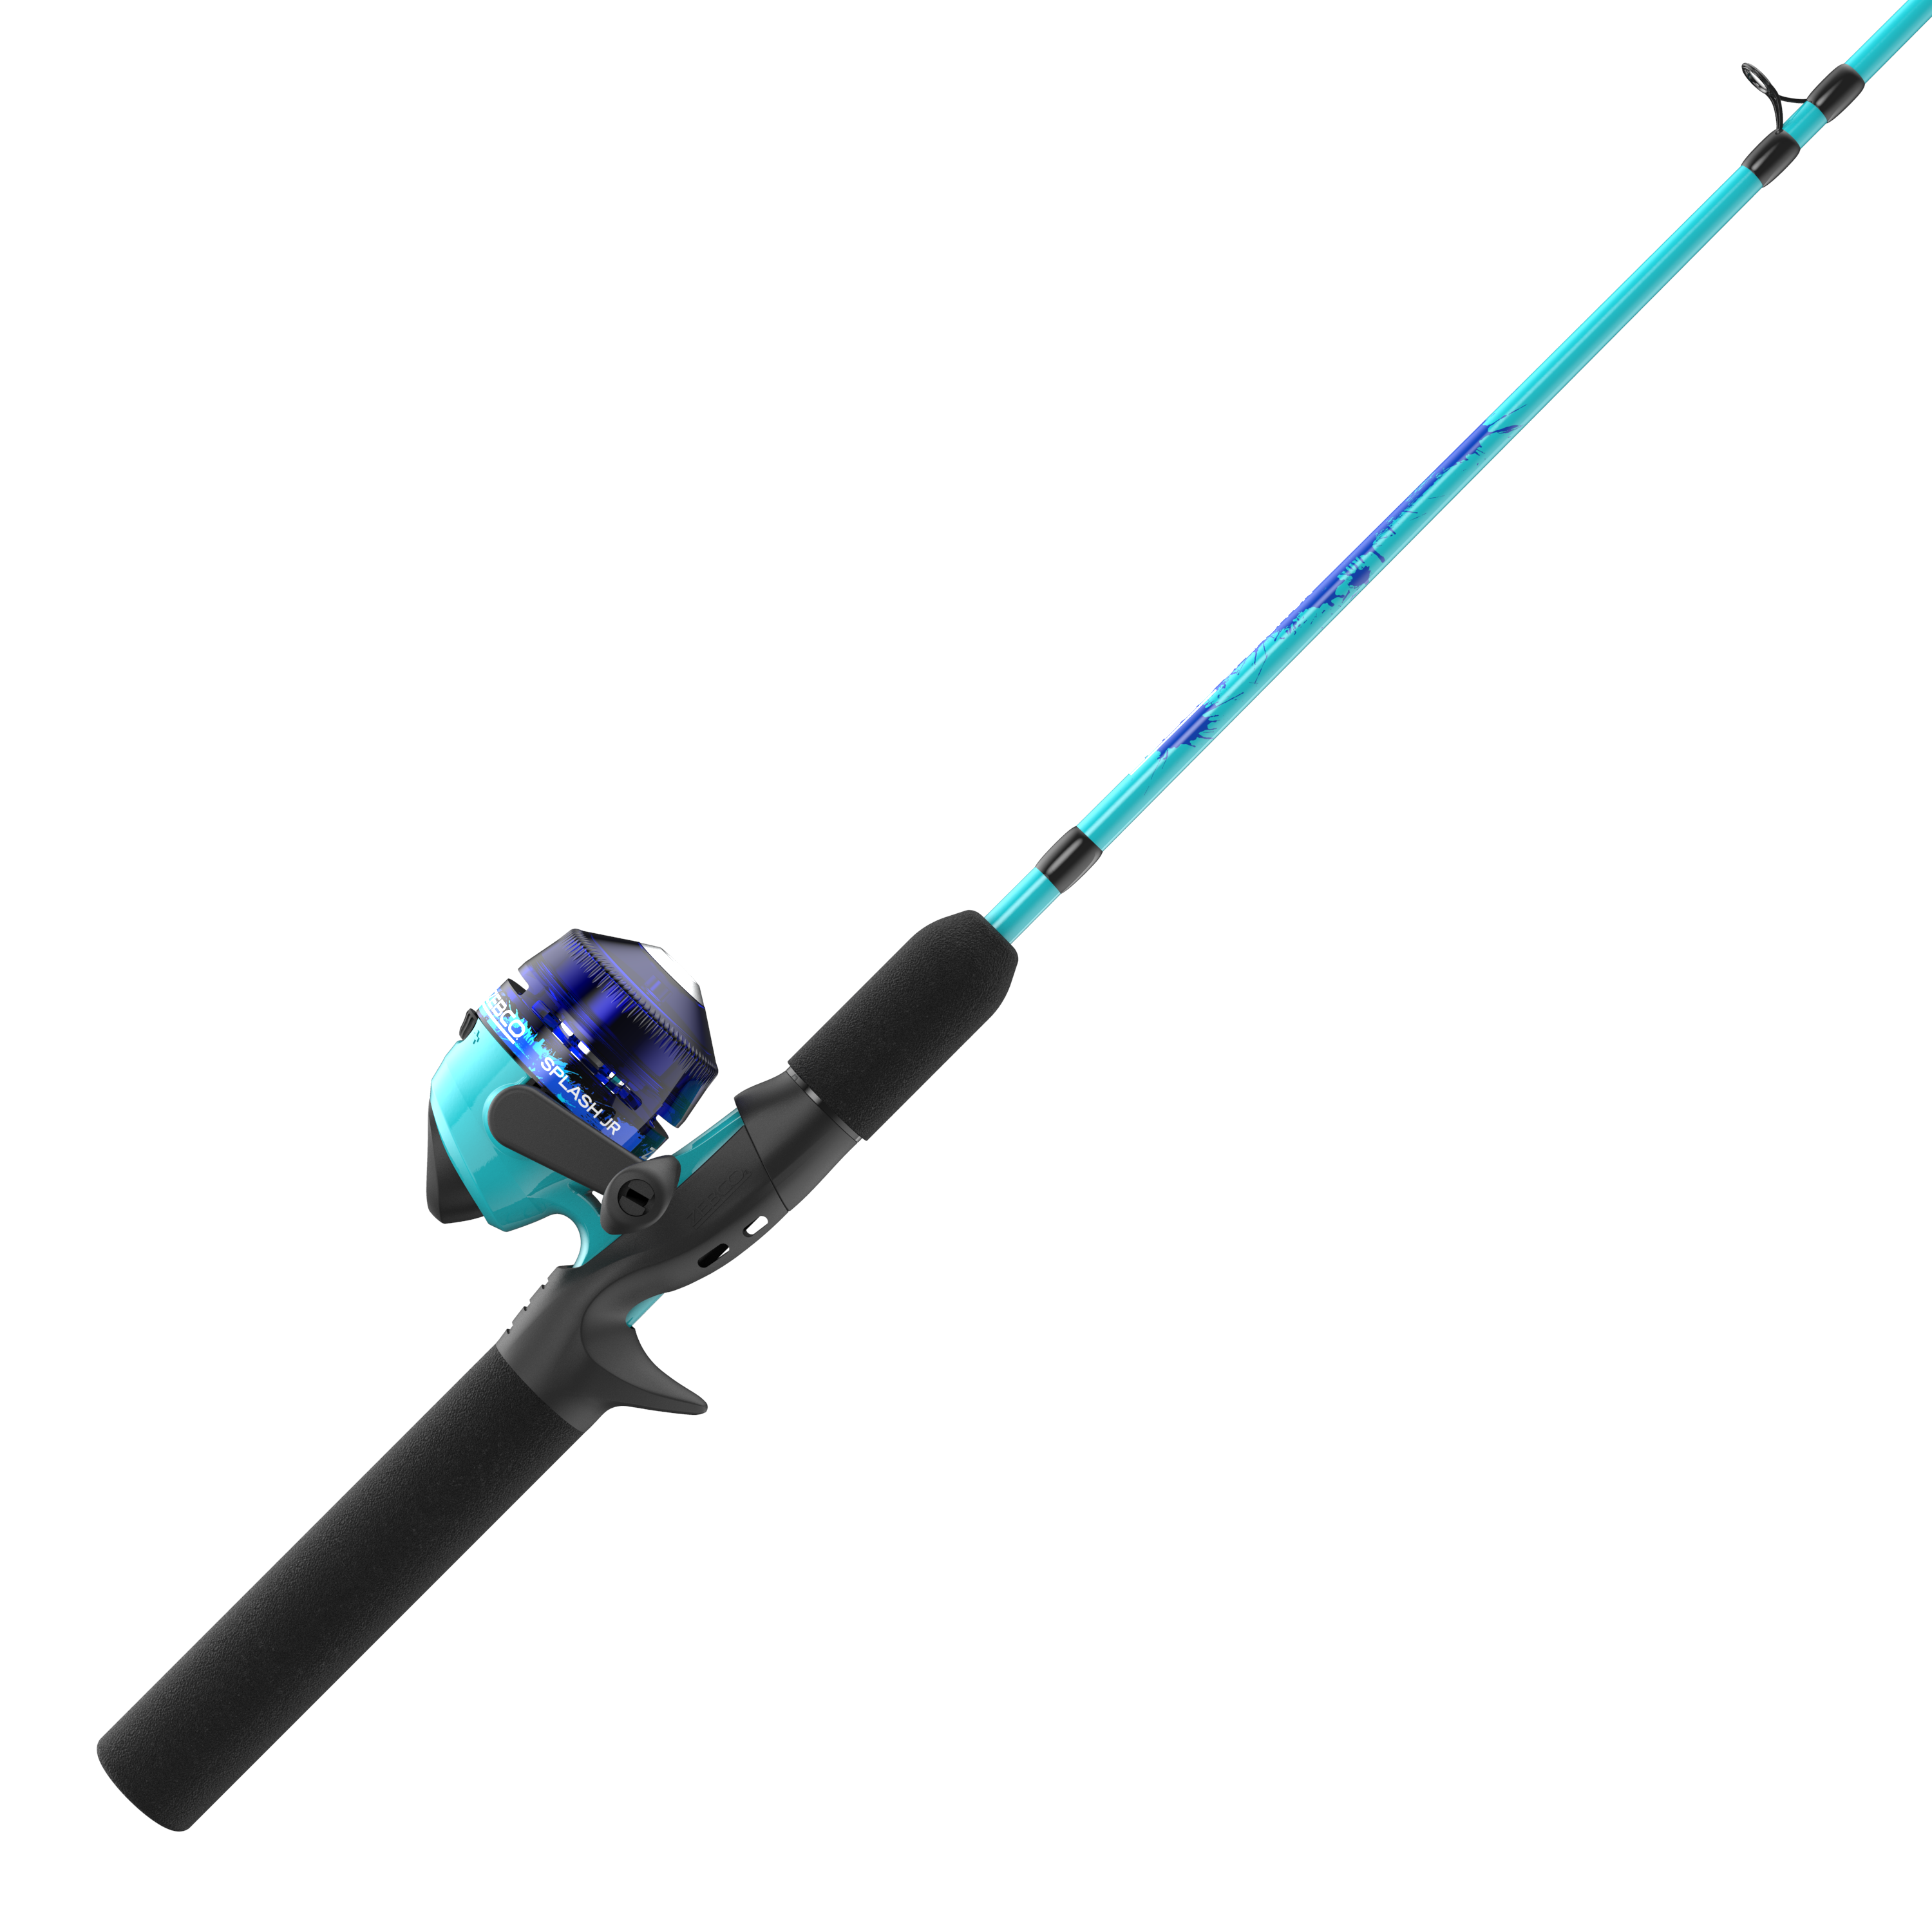 Zebco Slingshot Spinning Reel and Fishing Rod Combo, 2-Piece Medium-Light  Durable Fiberglass Rod, Comfortable EVA Handle, Pre-Spooled with 8-Pound